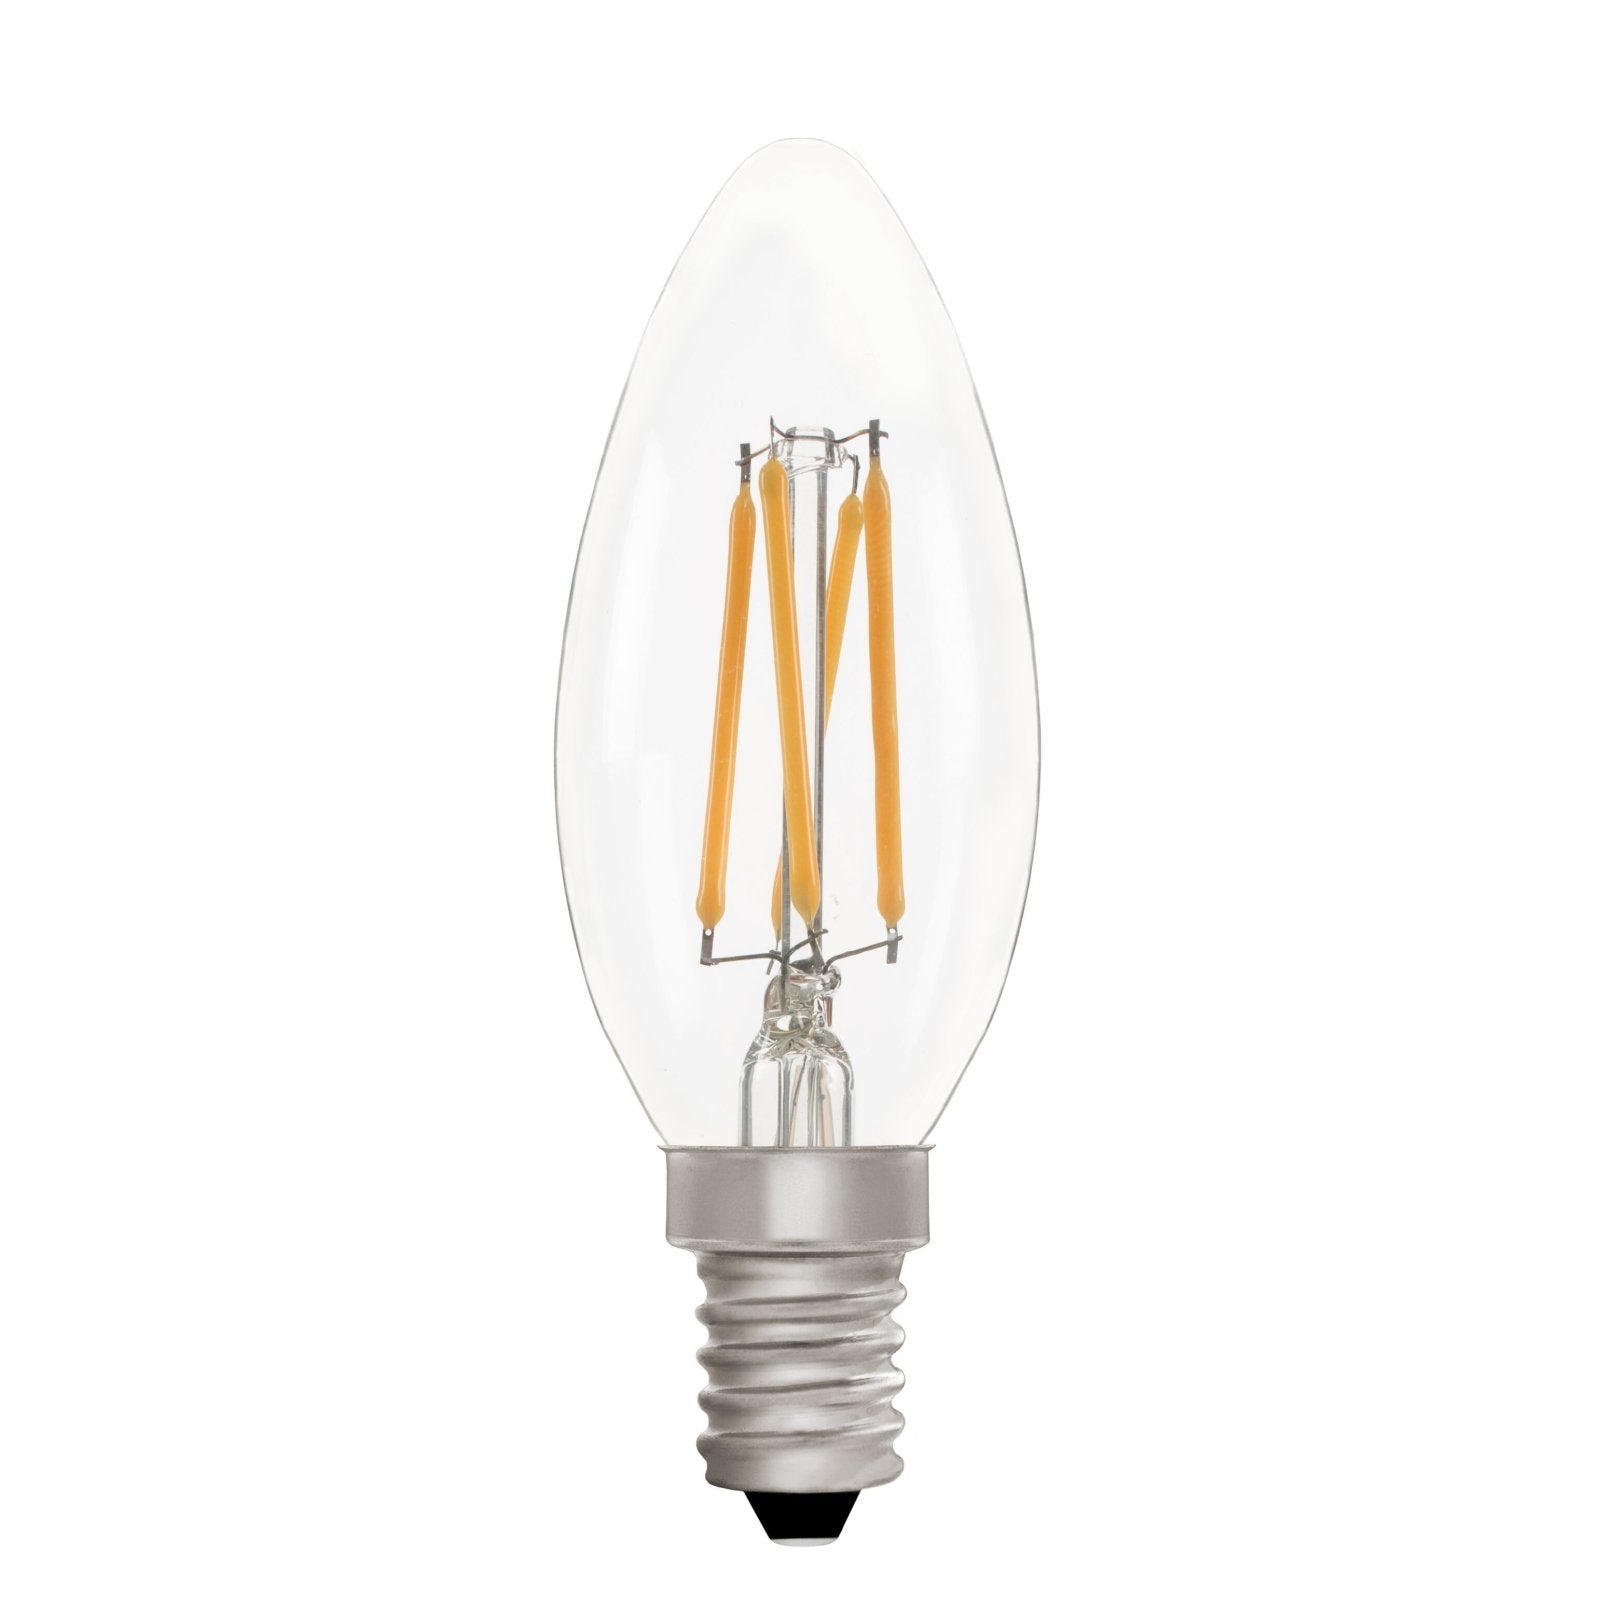 Candle C35 Clear 4W E14 2700K - LED Lamp from RETROLIGHT. Made by Zico Lighting.